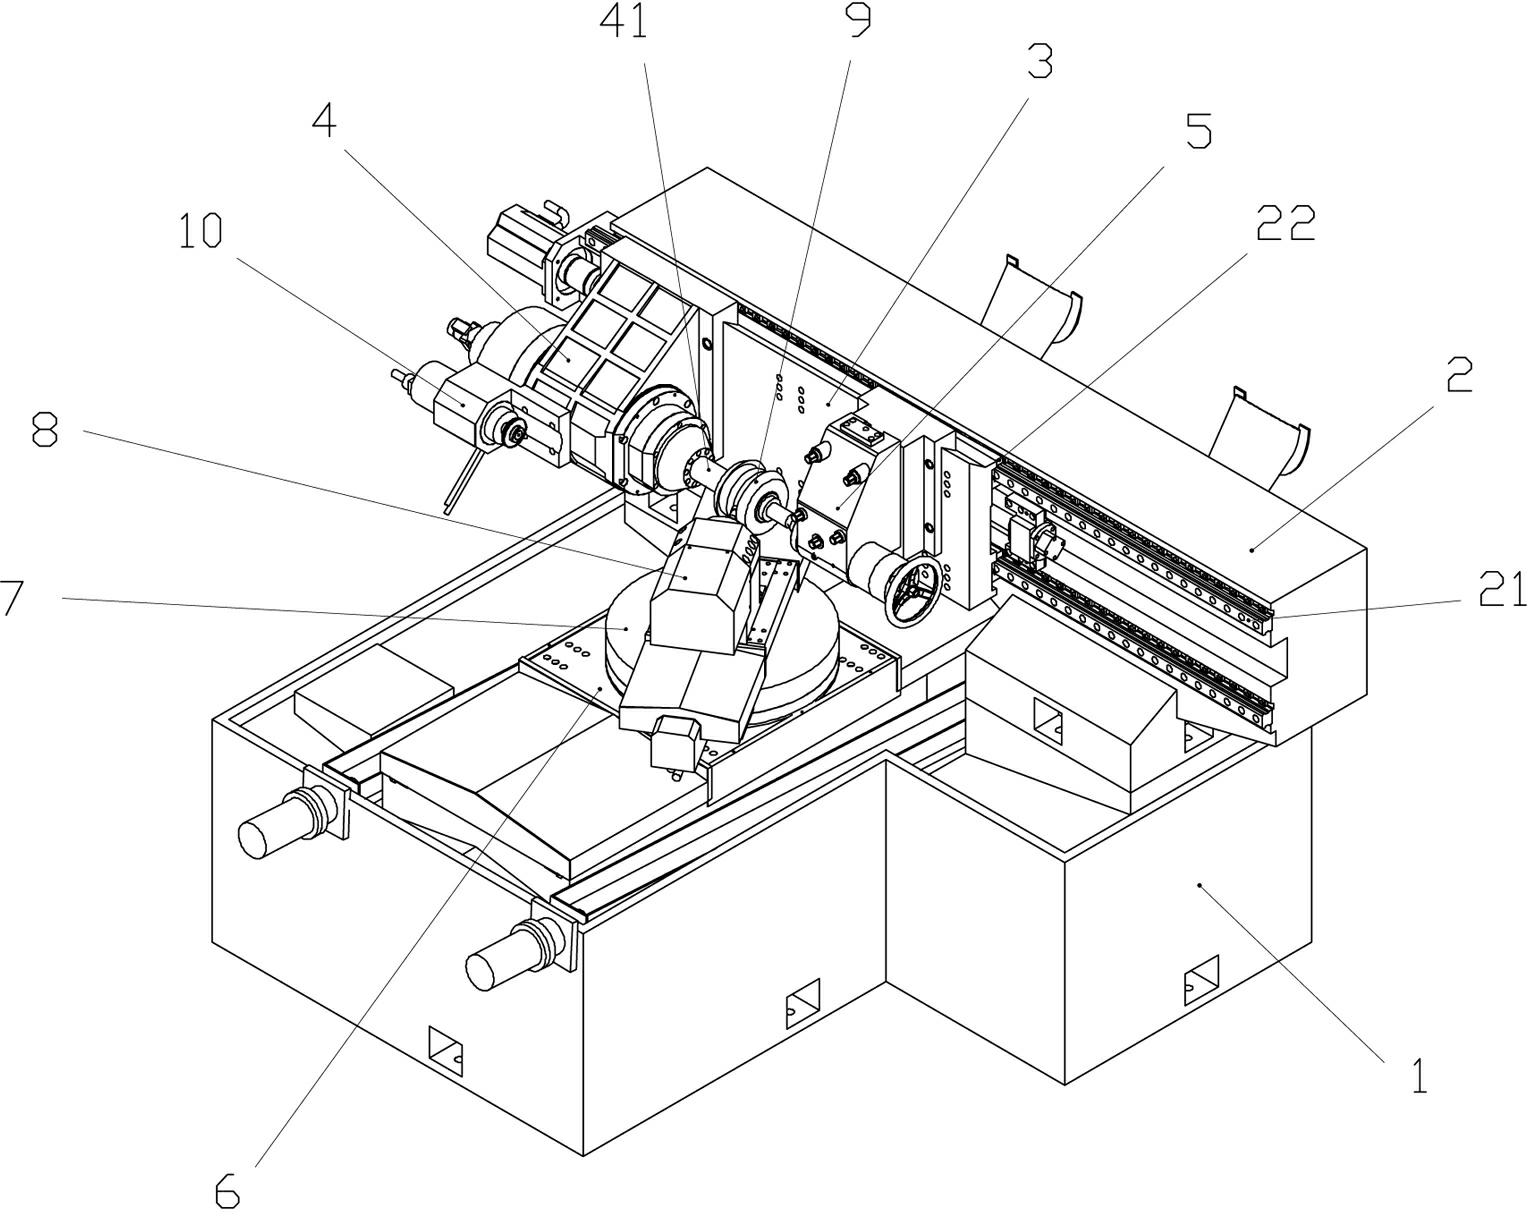 Special numerical-control grinding and milling machine for cams with arc-shaped surfaces